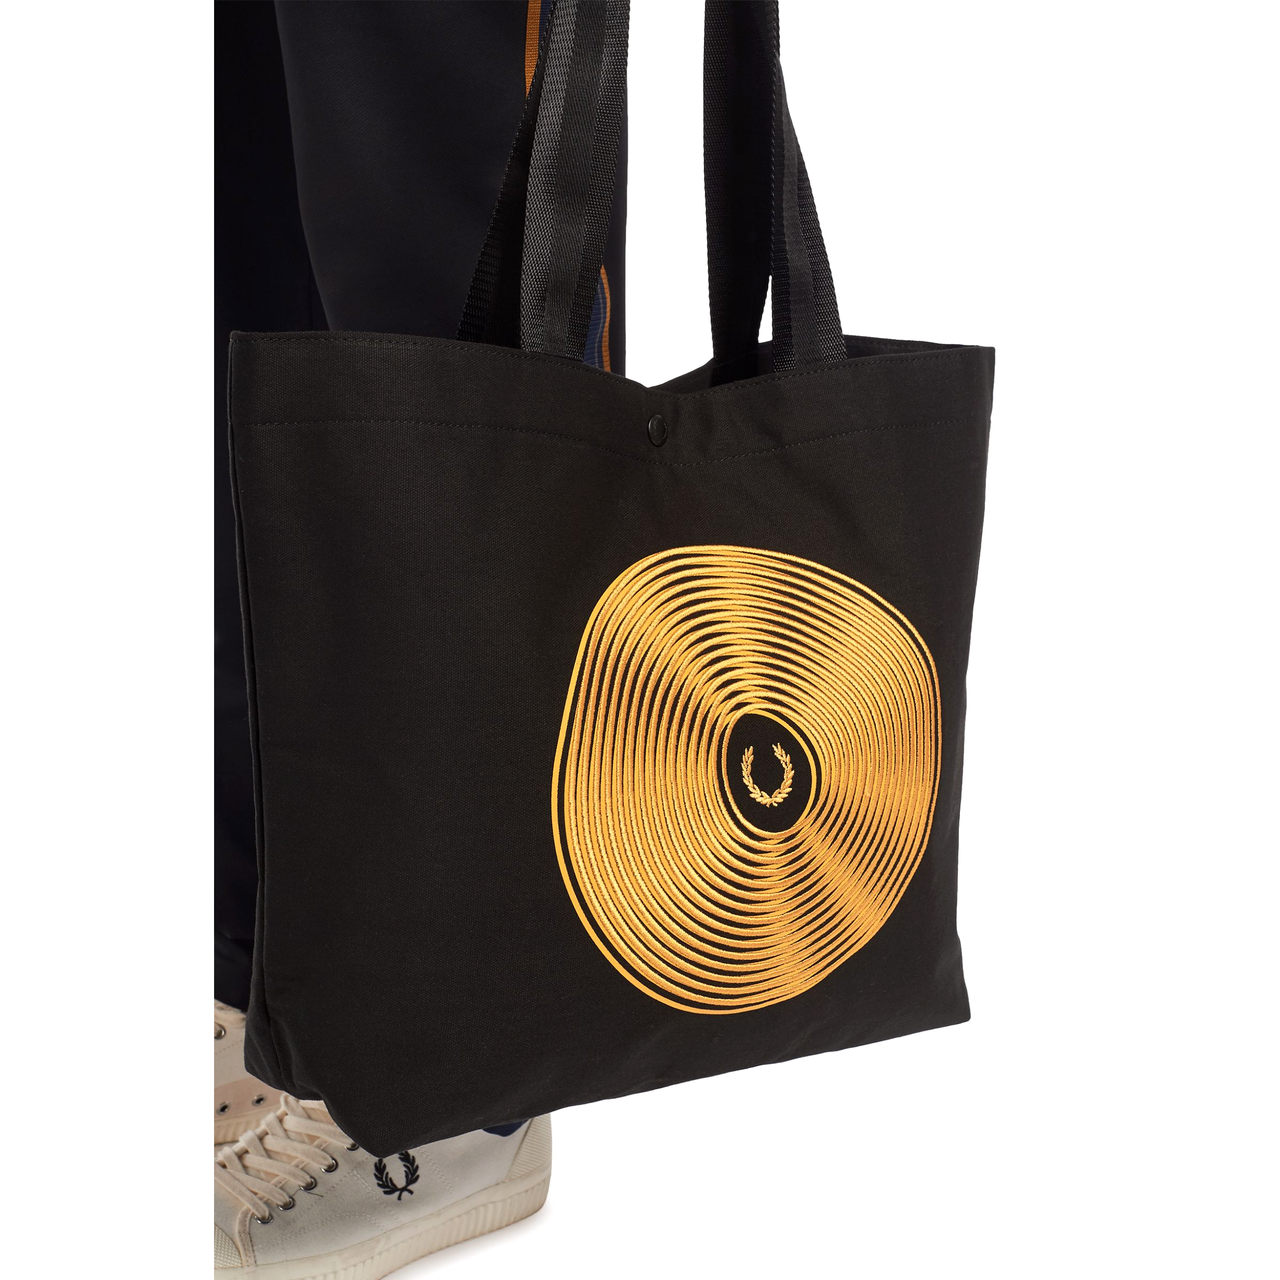 FRED PERRY DISC GRAPHIC TOTE BAG